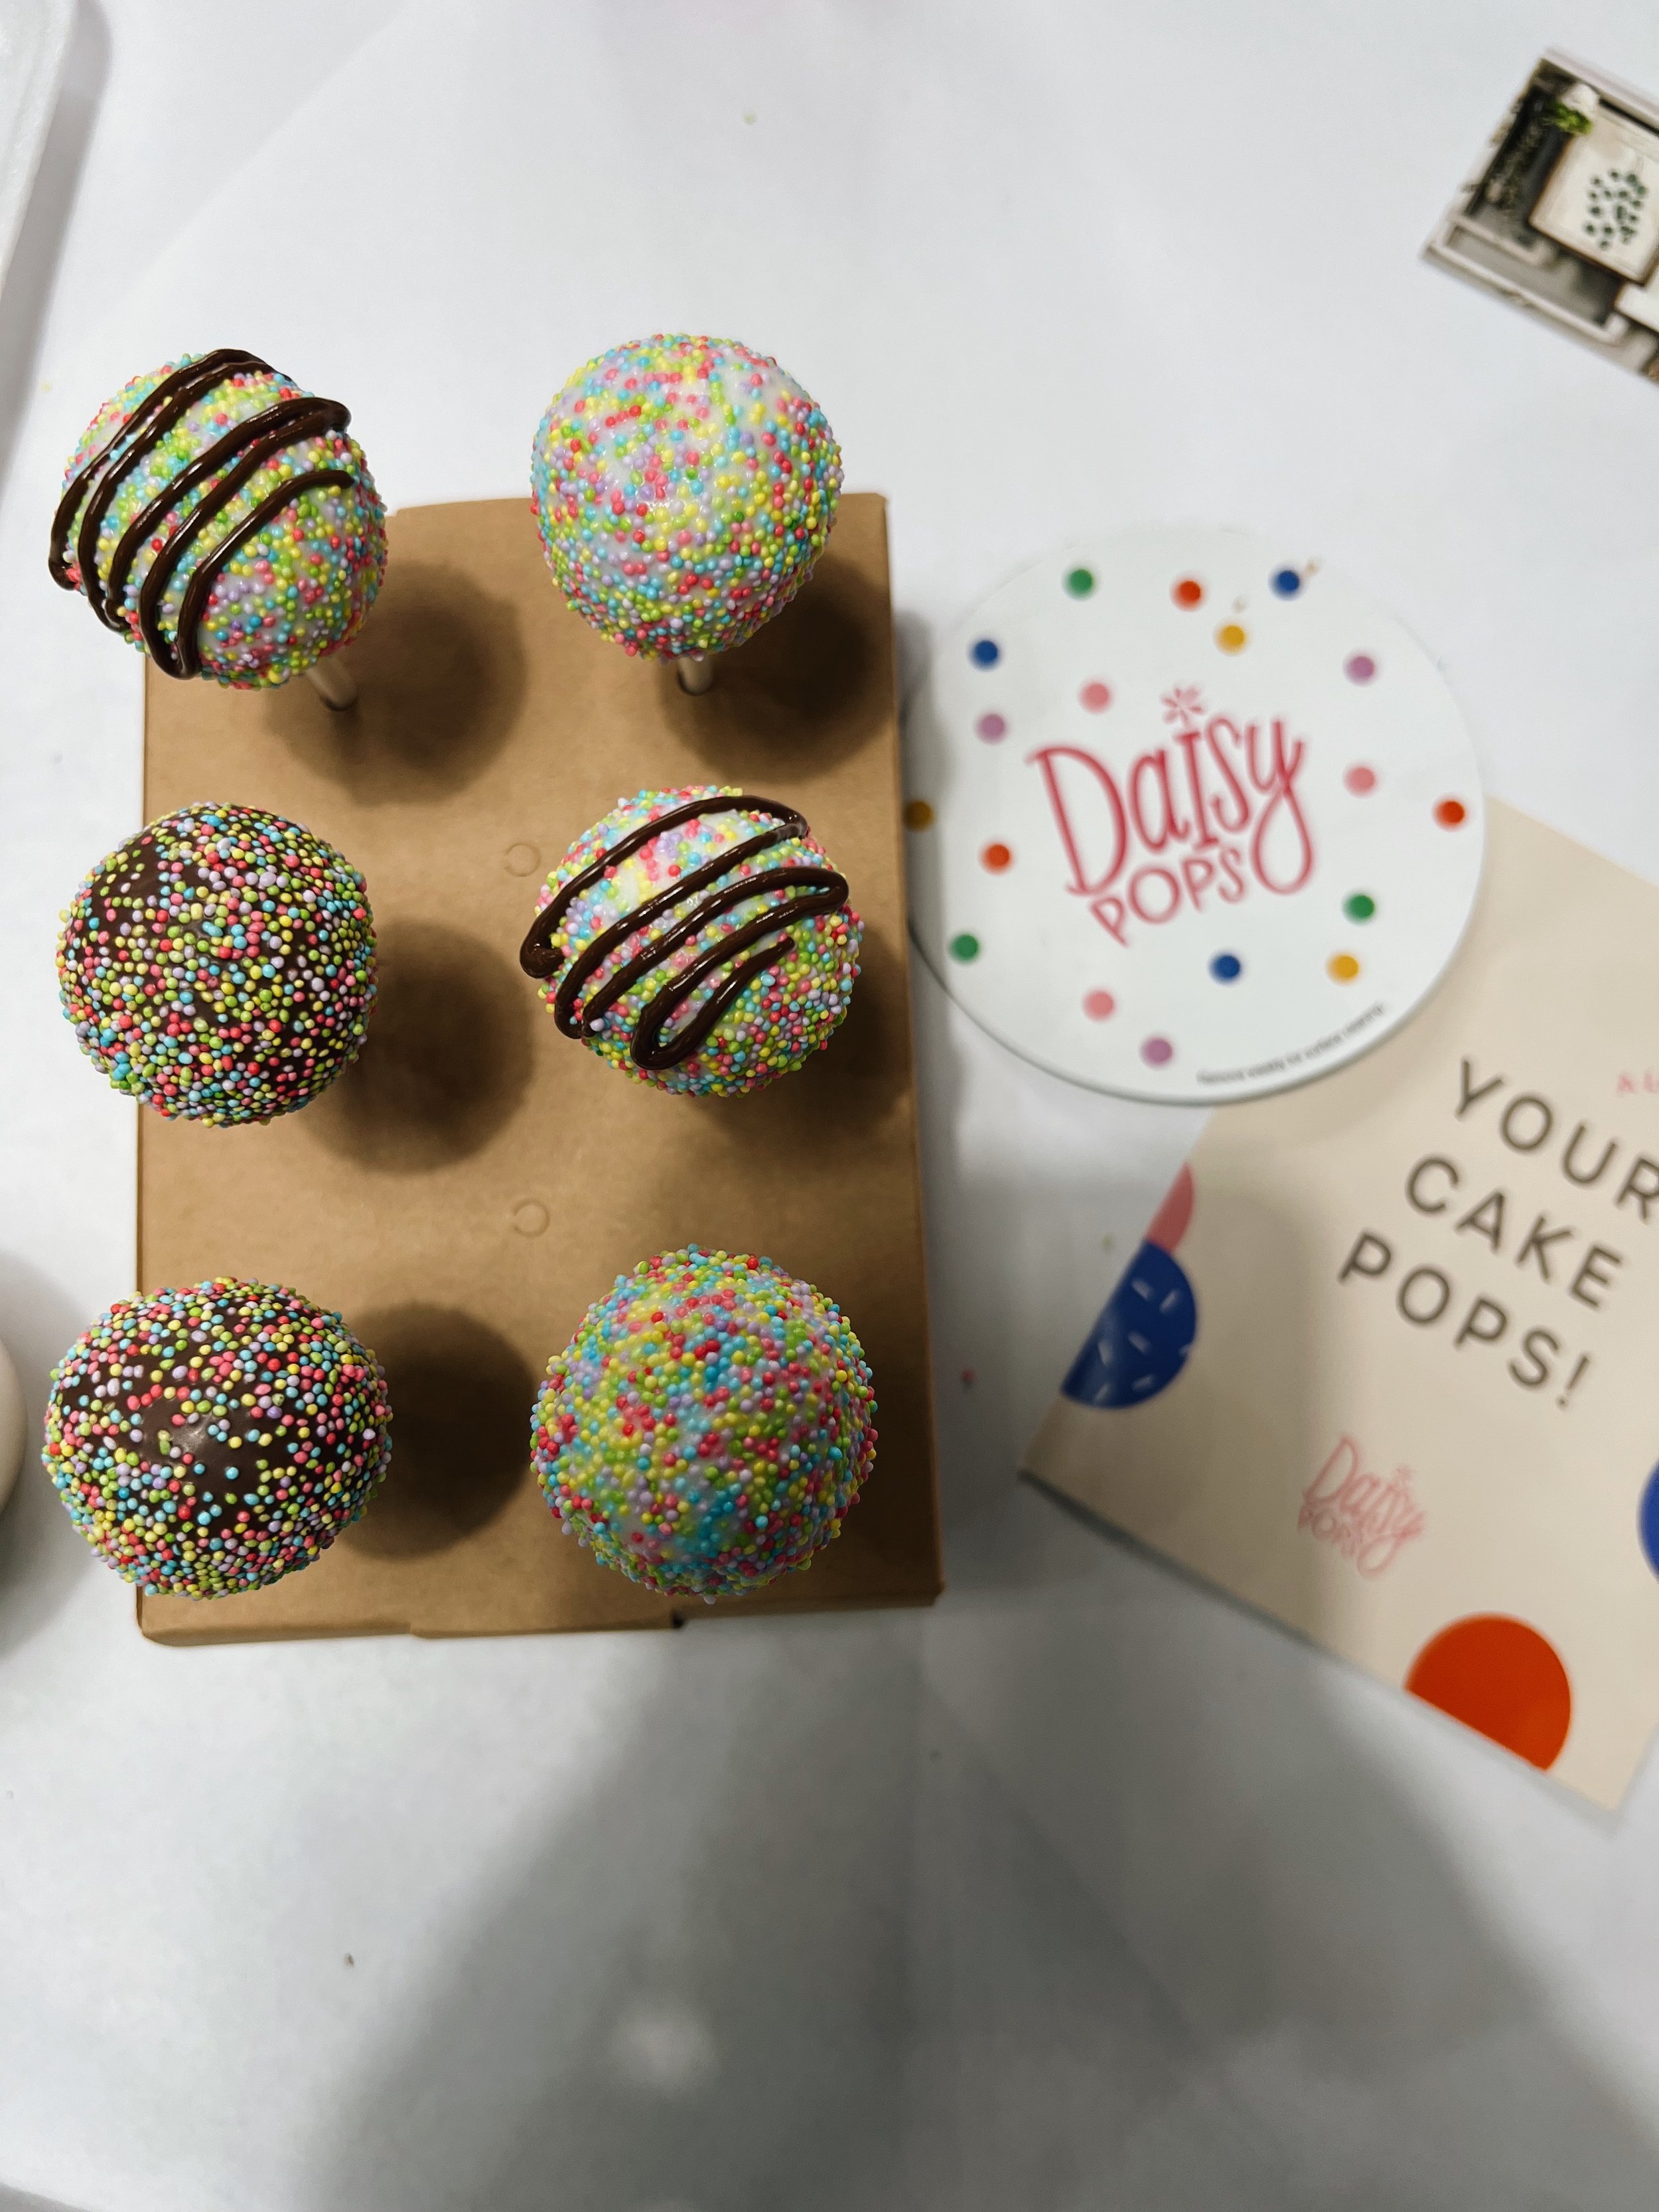 Cake Pop Workshop with Daisy Pops